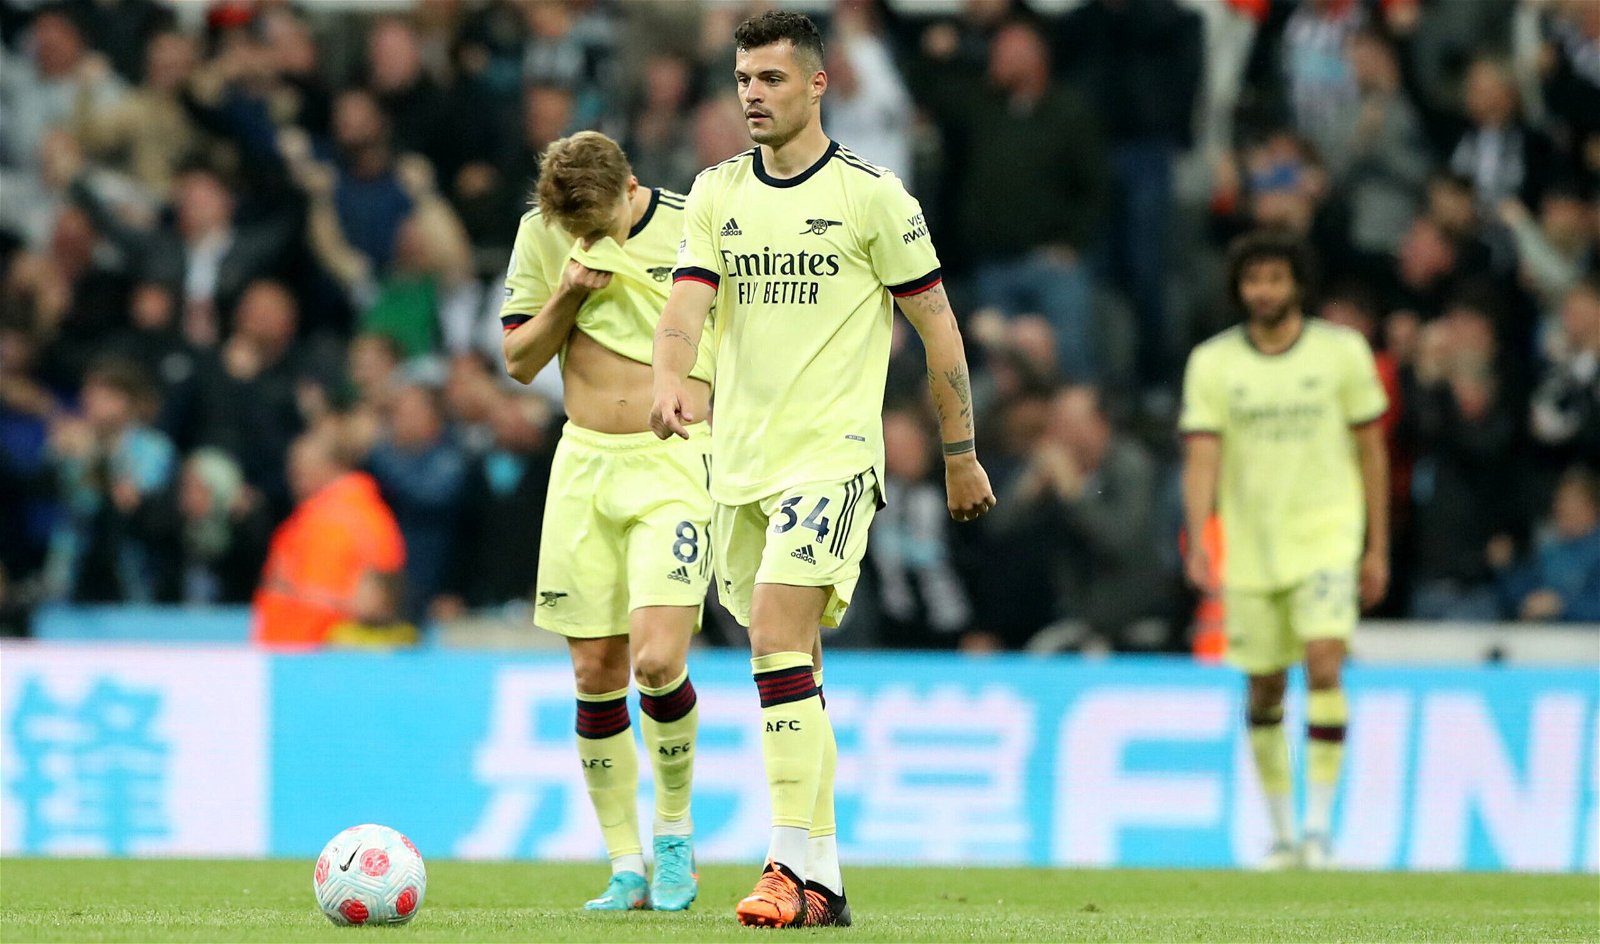 A-dejected-Granit-Xhaka-after-Arsenals-defeat-to-Newcastle-United